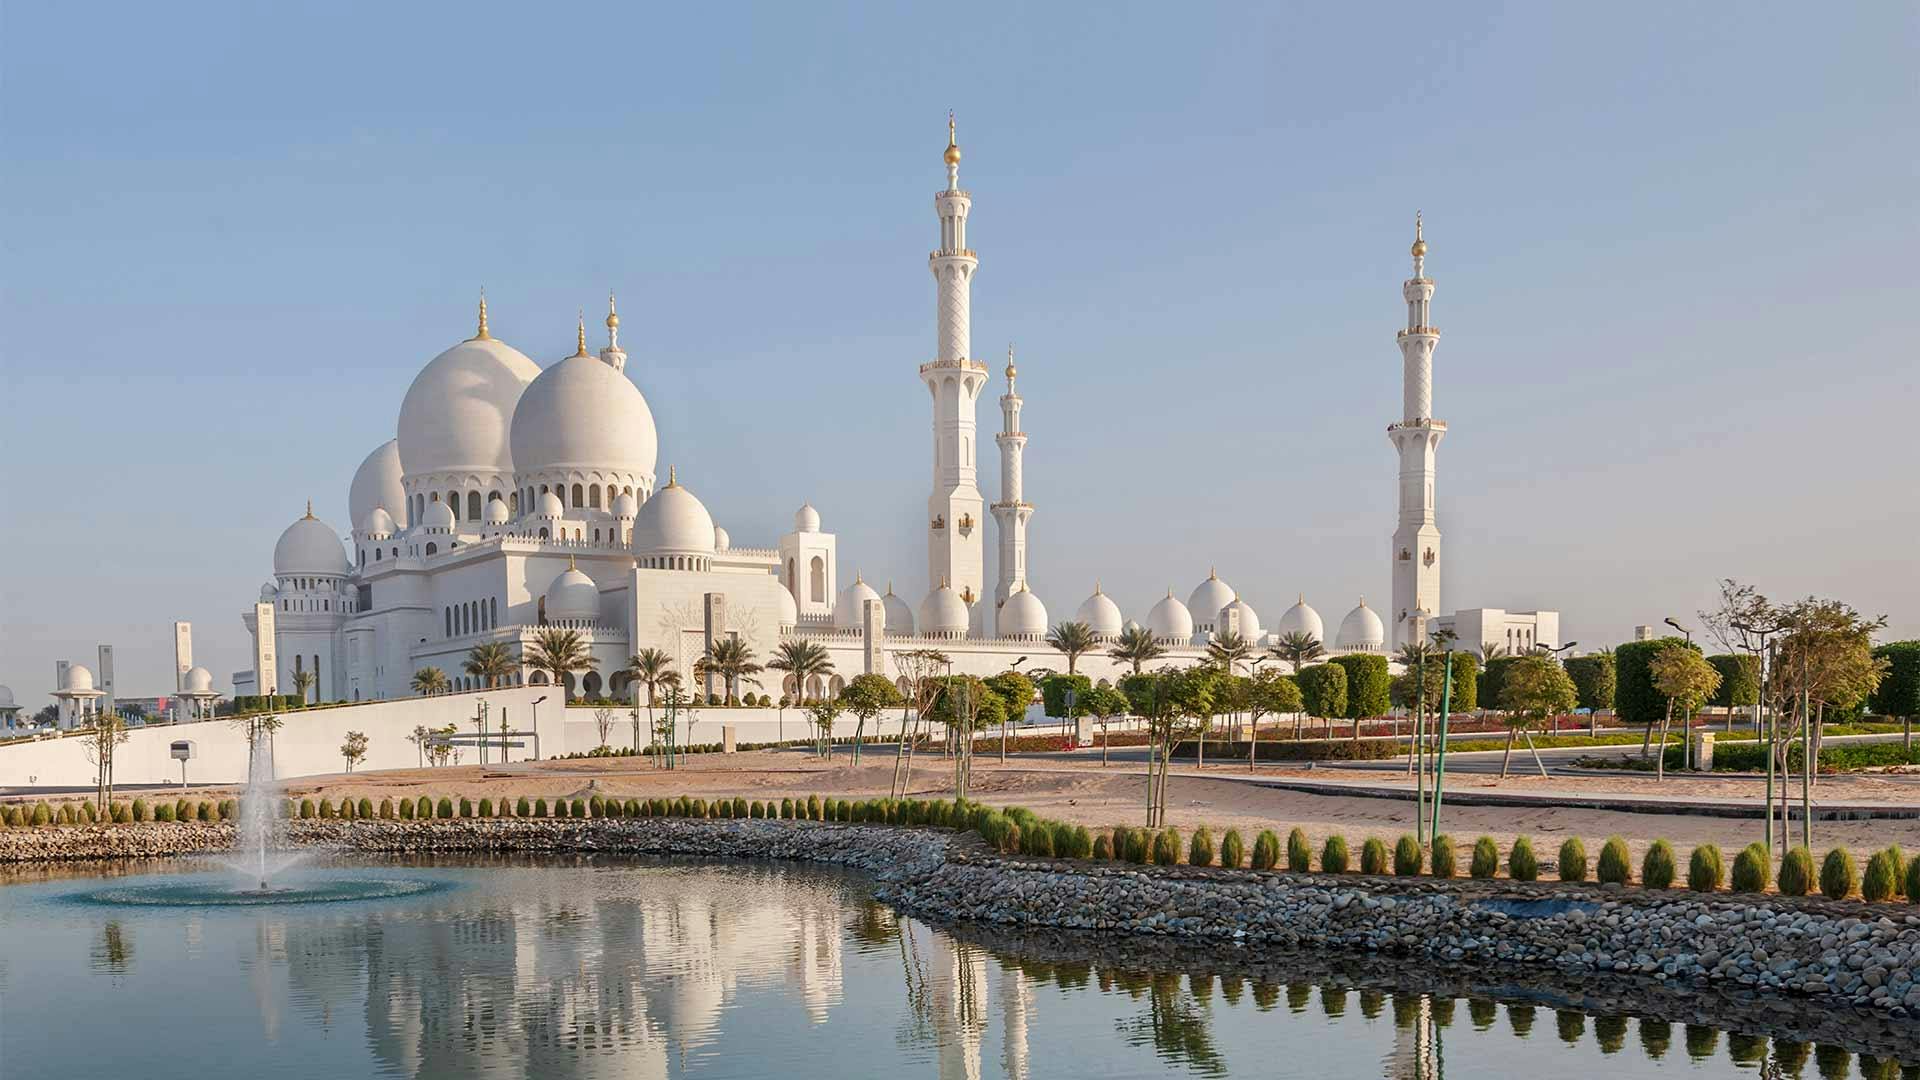 Sheikh Zayed mosque in Middle East United Arab Emirates